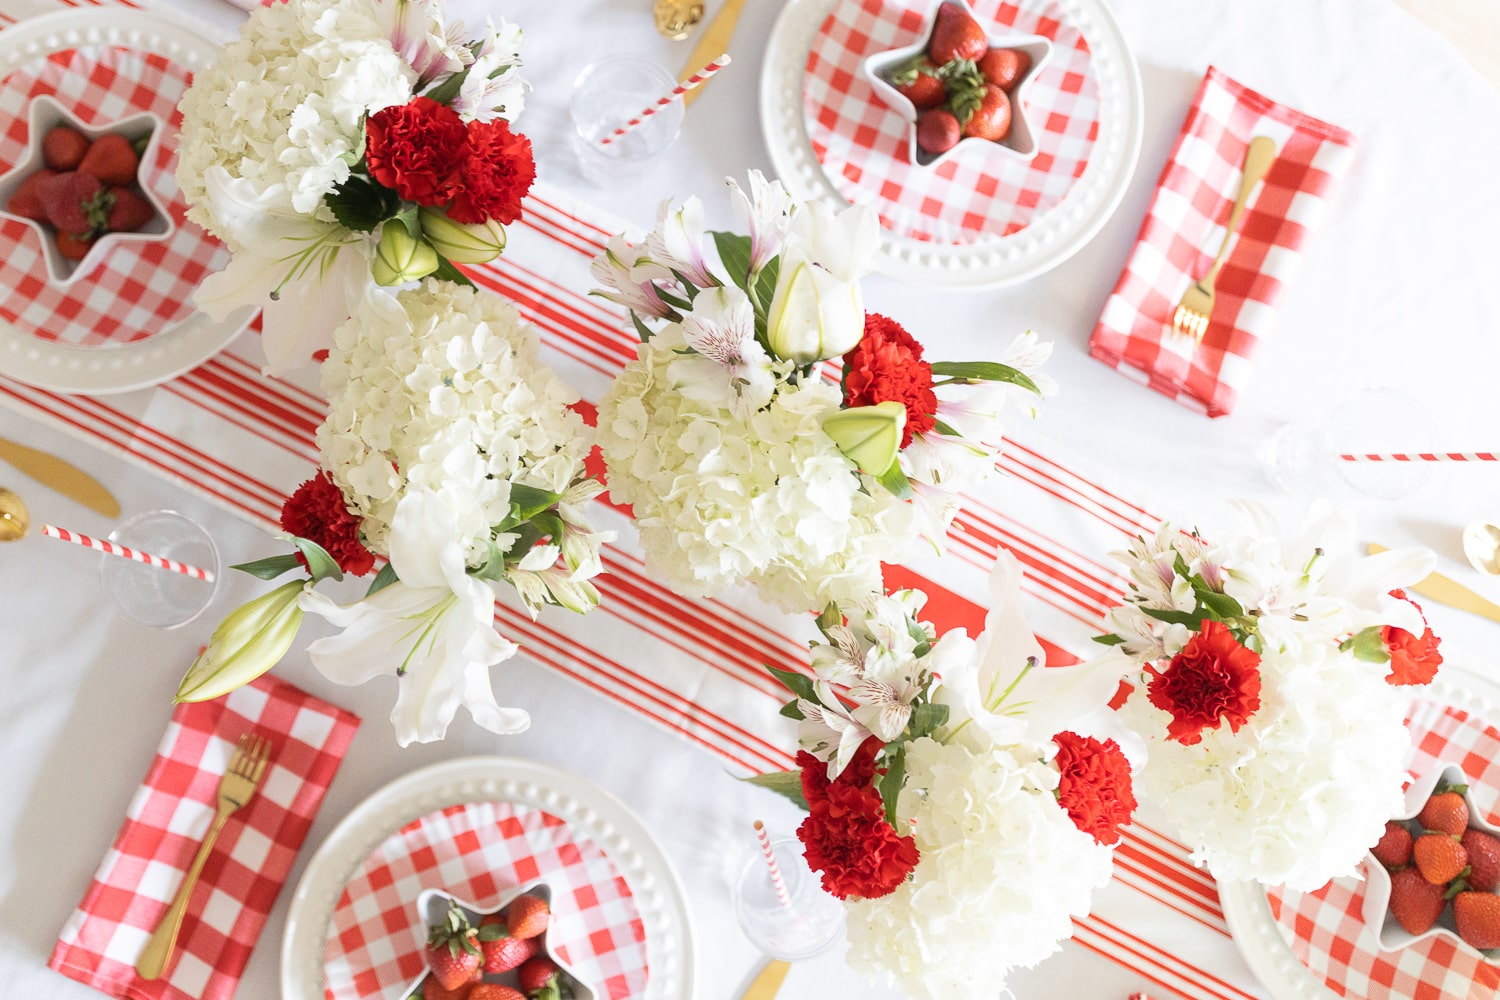 Long patriotic centerpiece created by blogger Stephanie Ziajka on Diary of a Debutante